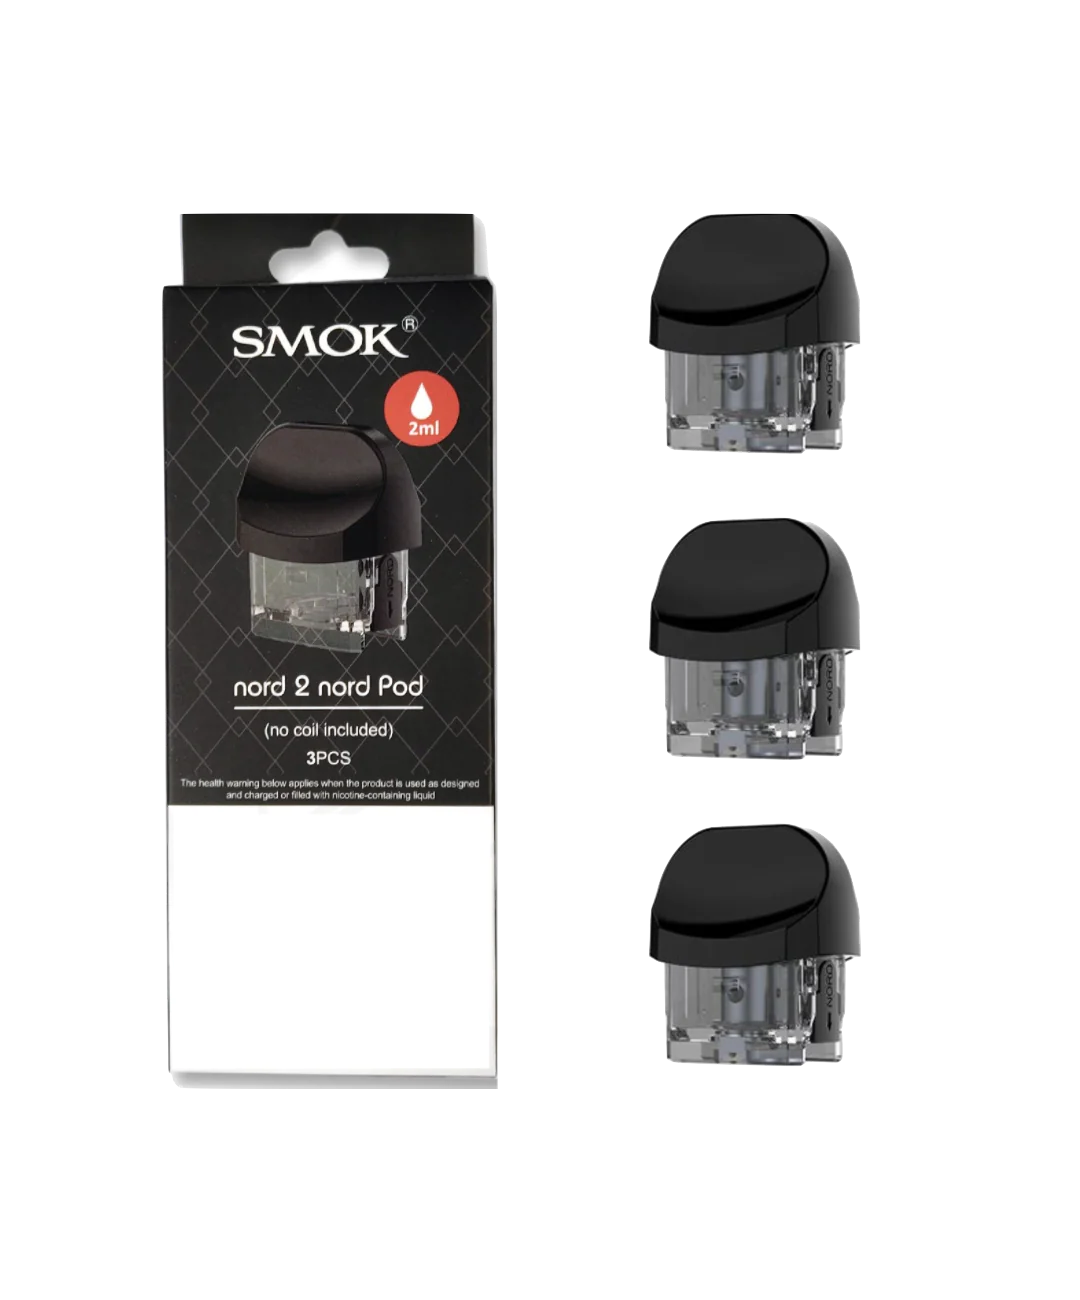 smok nord 2 rpm pod no coil included